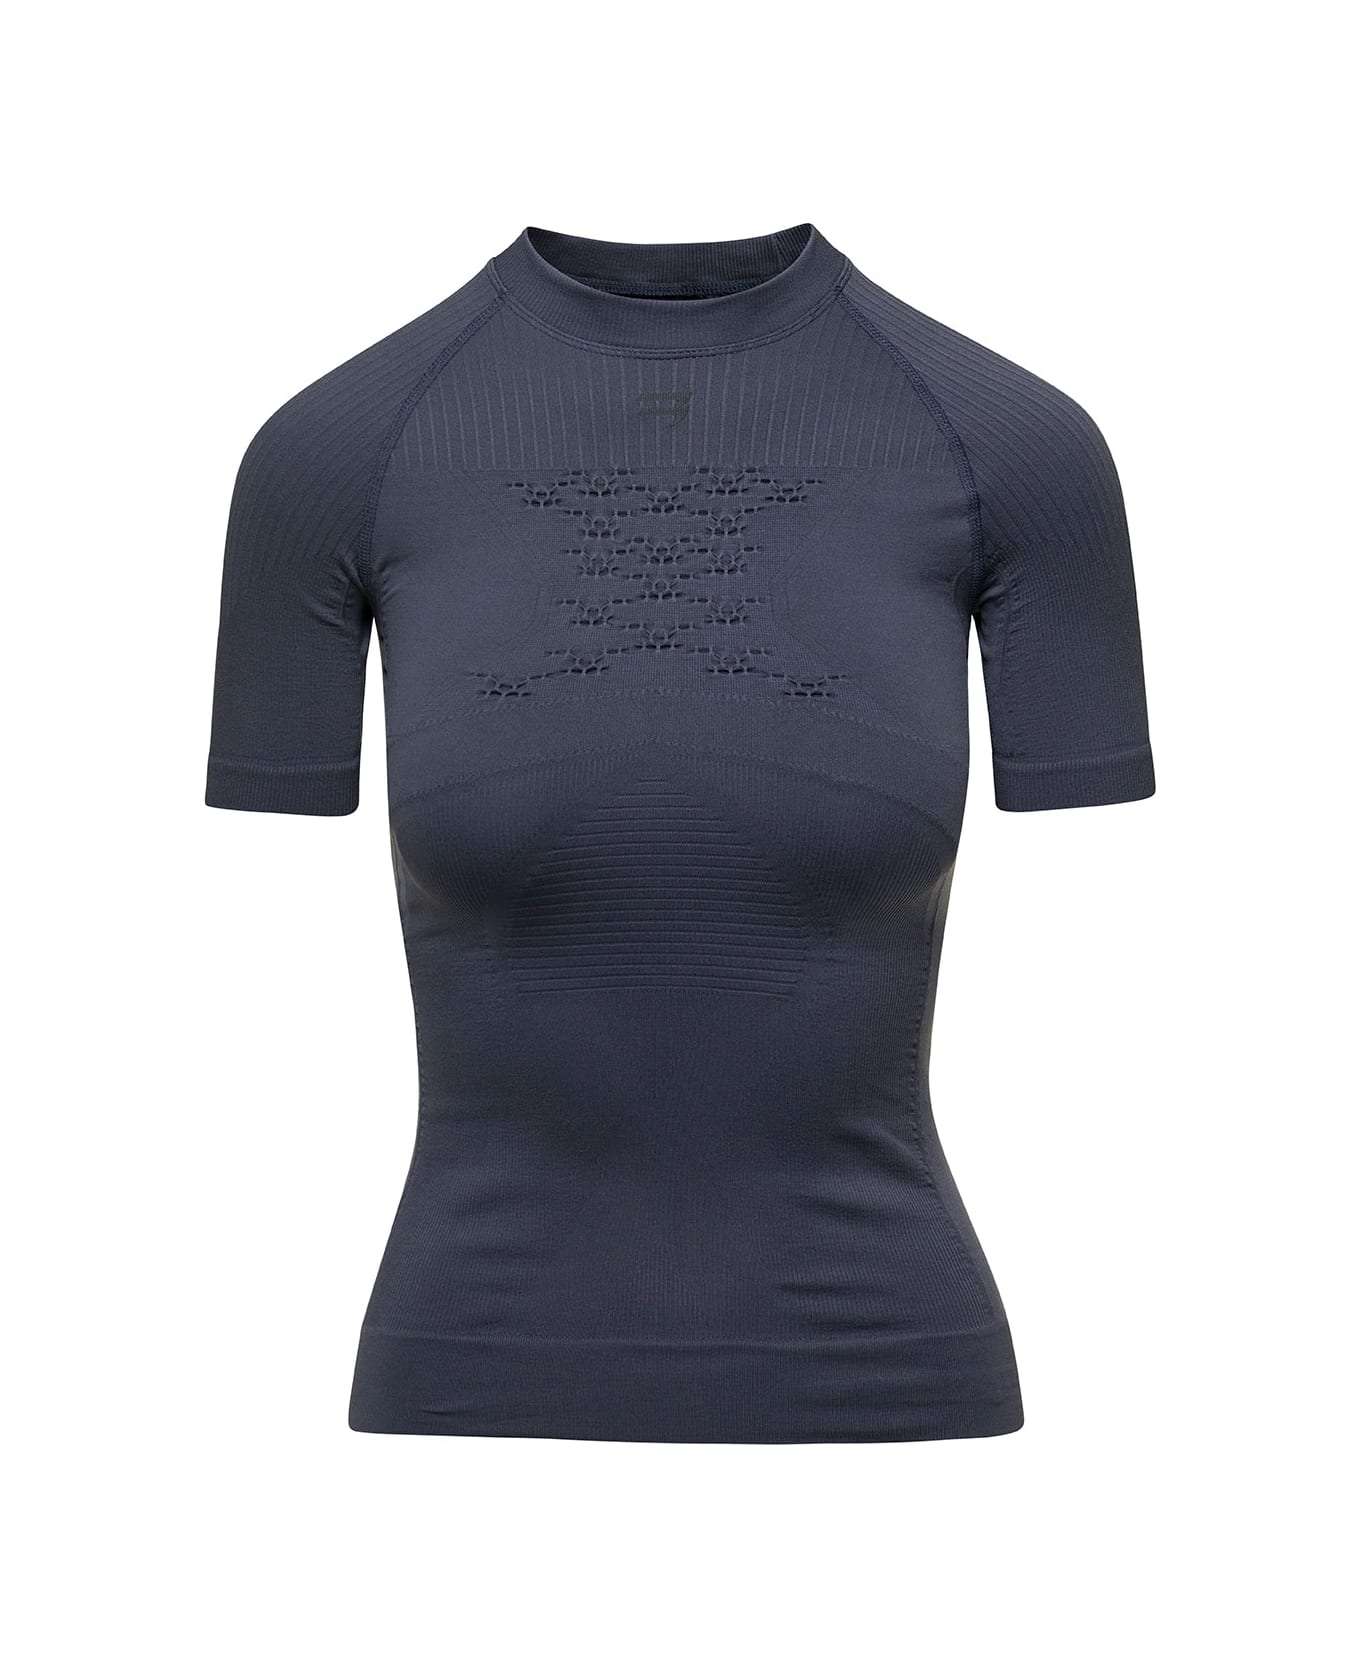 Balenciaga 'energy Accumulator' Dark Grey Fitted T-shirt With Perforated Details In Stretch Polyamide Woman - Grey